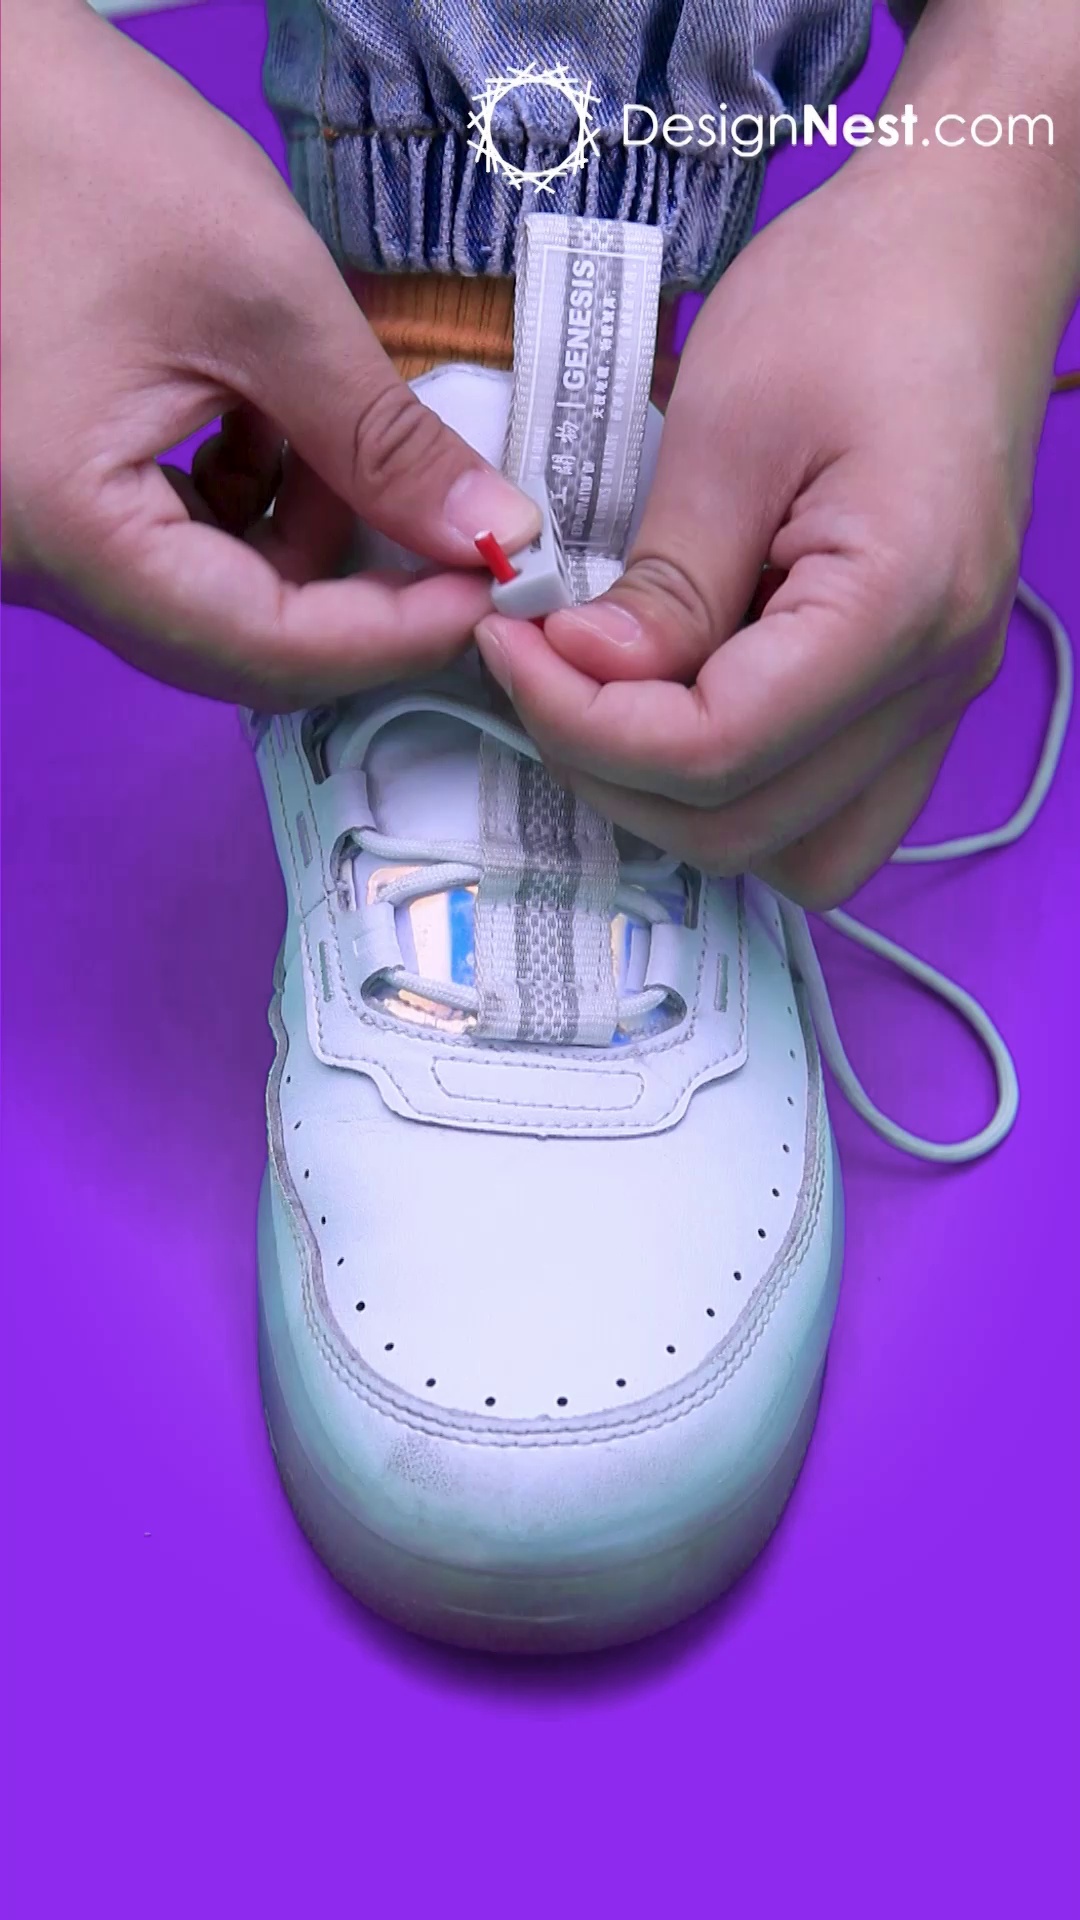 Zubits magnetic lacing solution - Never tie laces again!